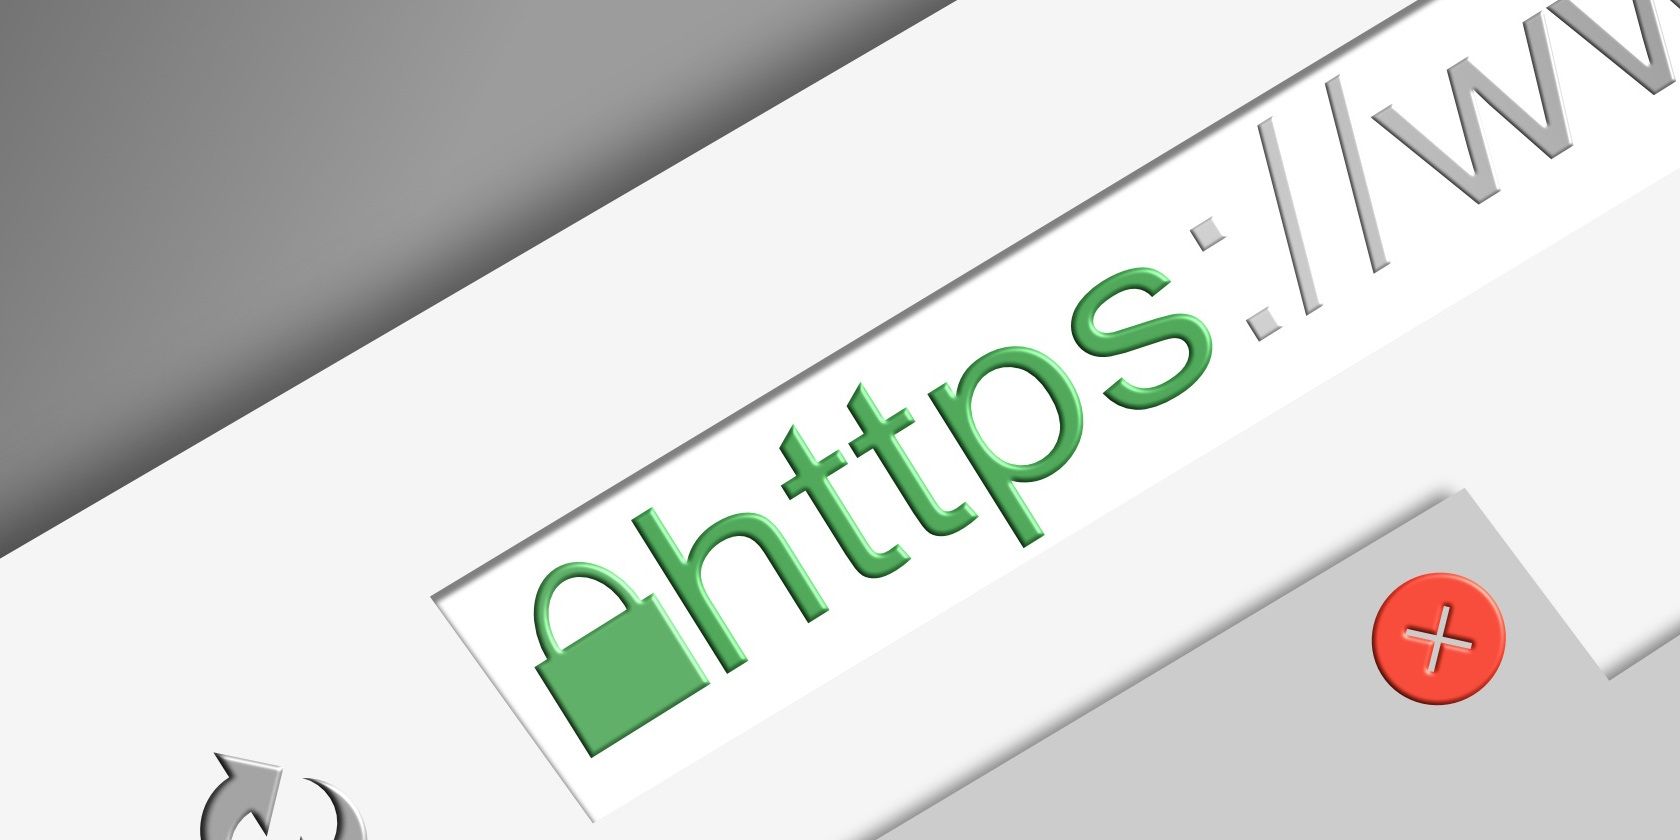 An image with HTTPS written on it in green with a green padlock icon